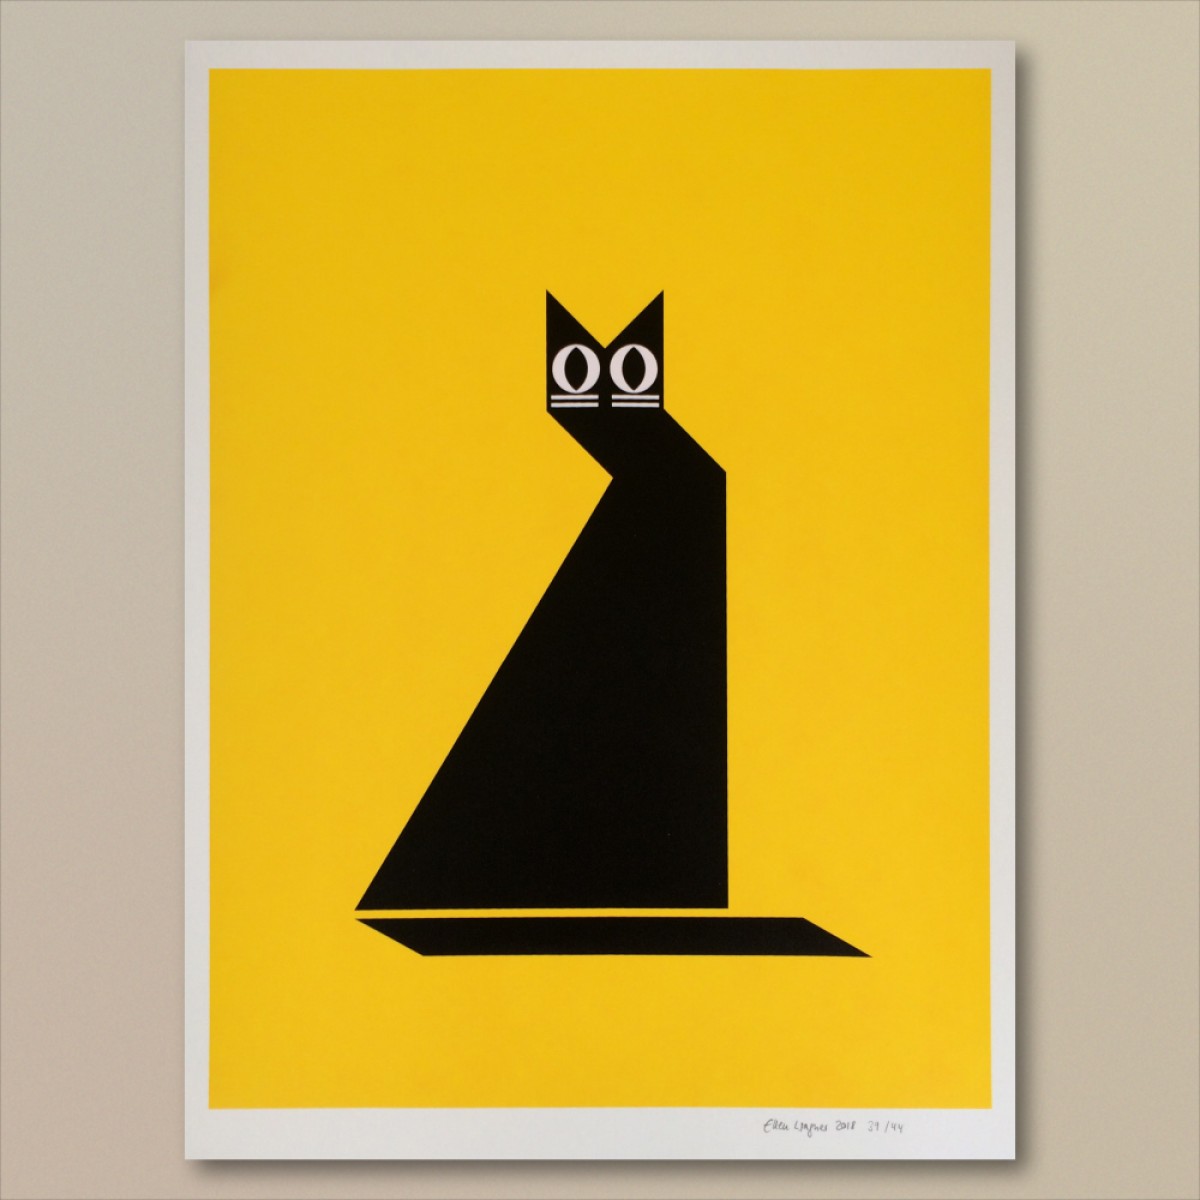 Print now - Riot later
Abstract Cat